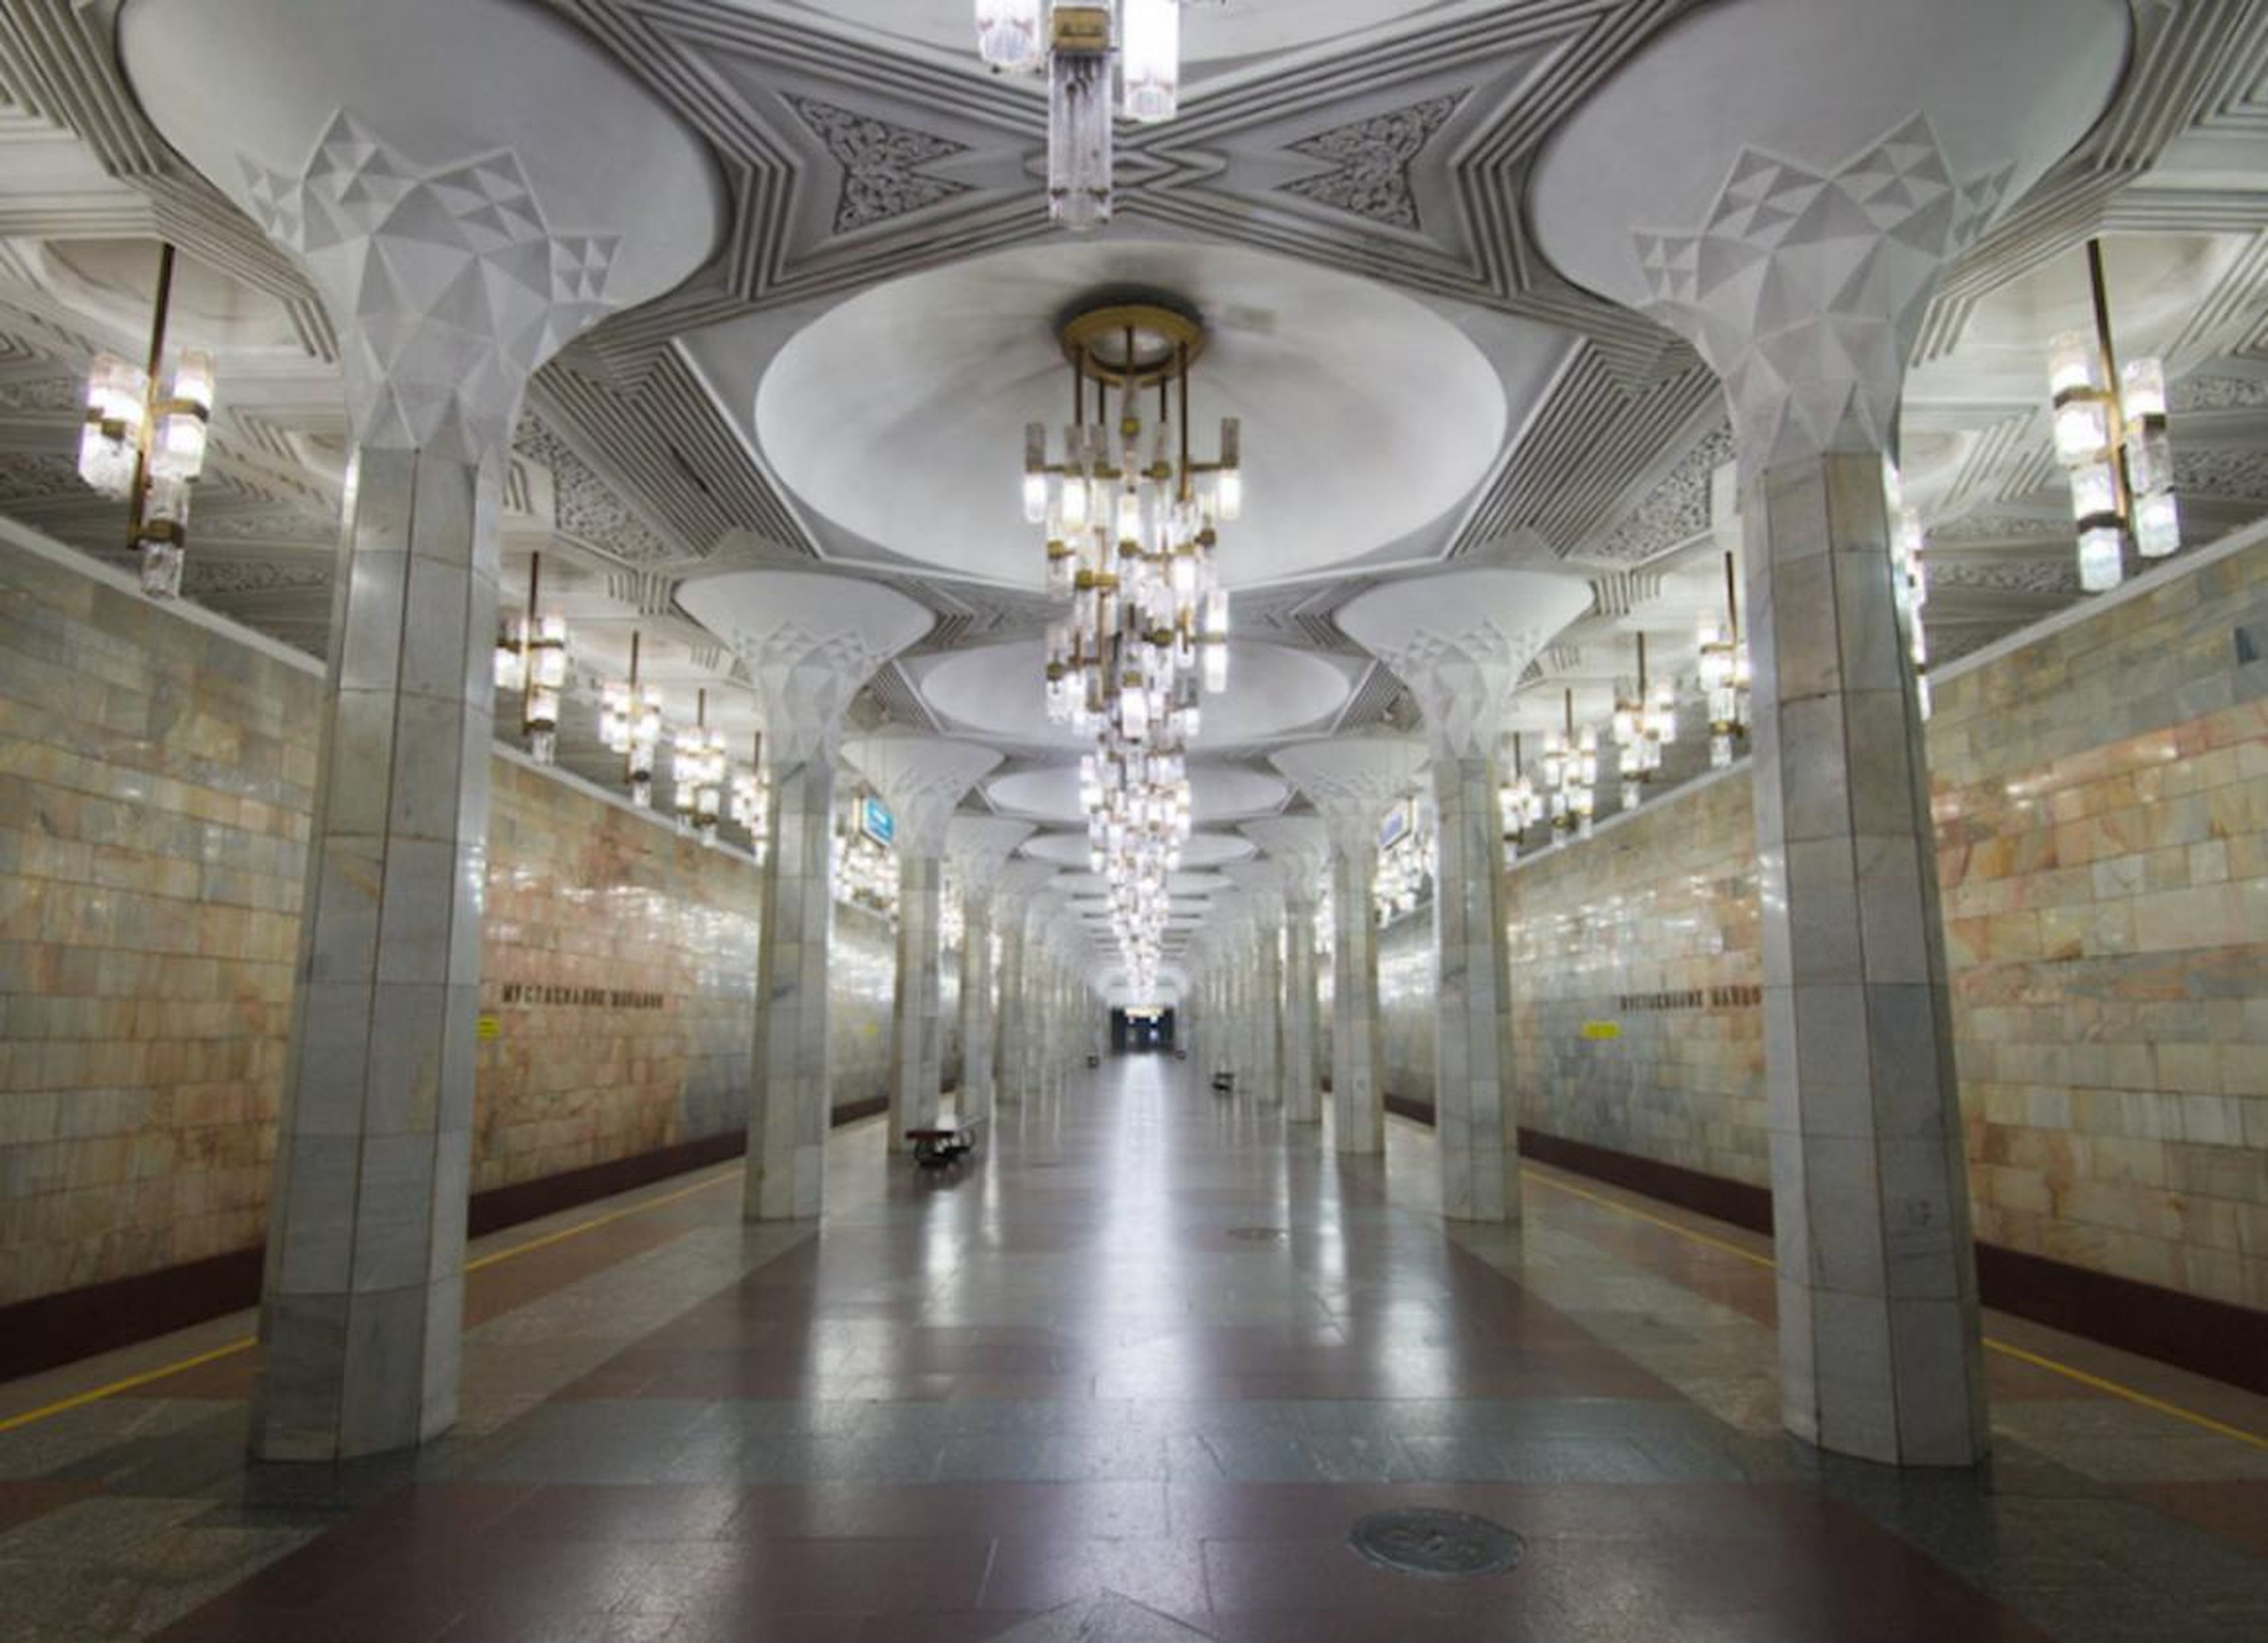 The subway system is the oldest in central Asia. It opened in 1977, when Uzbekistan was part of the Soviet Union.